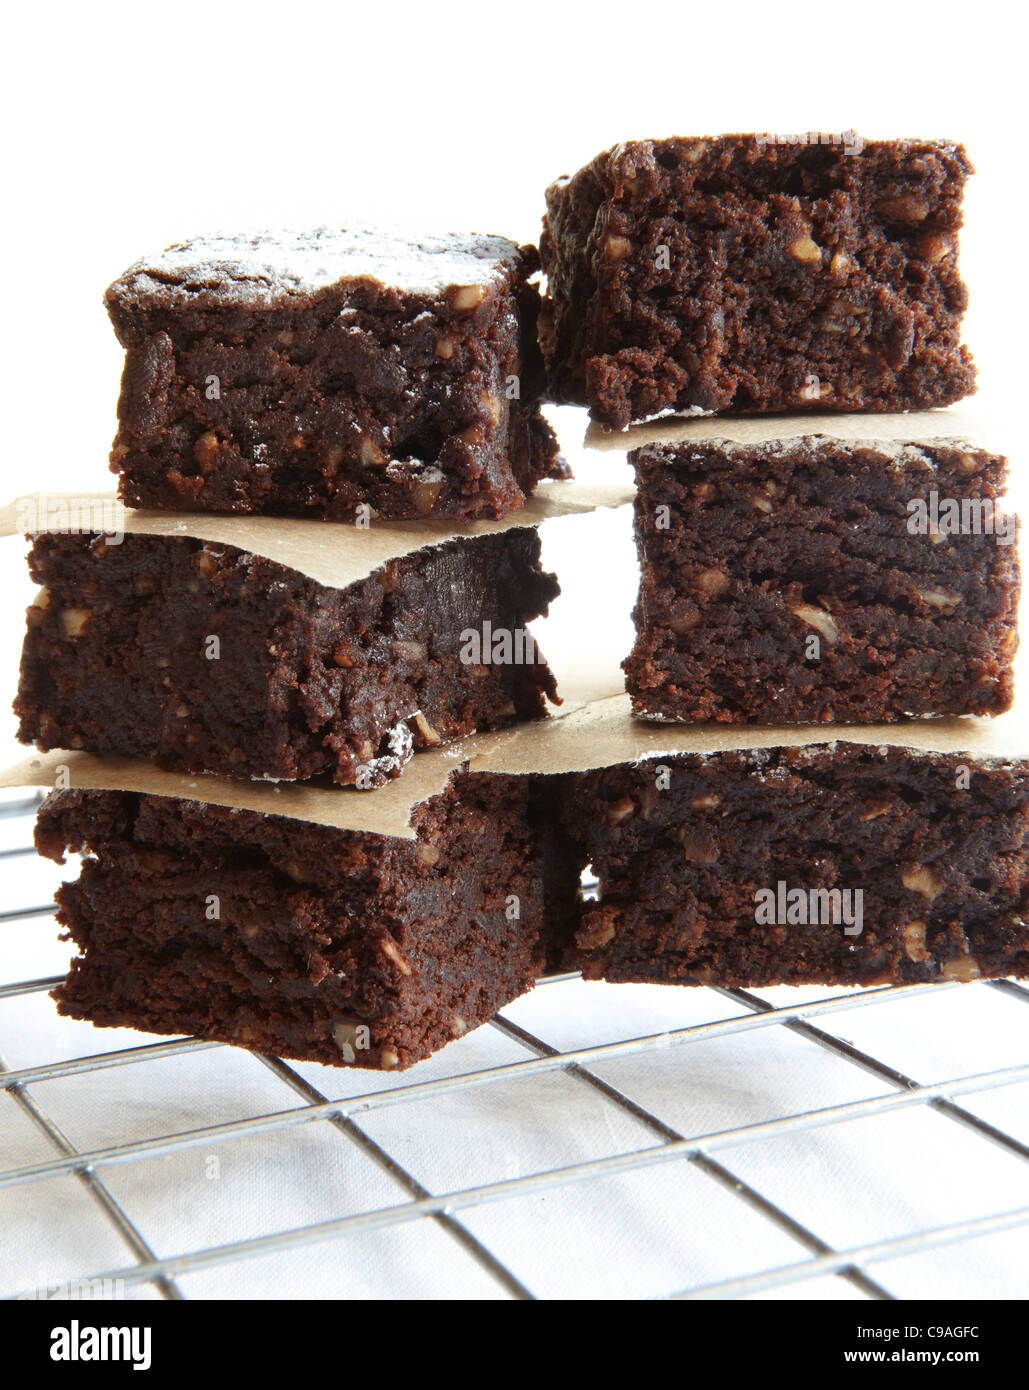 Chocolate Brownies stacked on cooling rack Stock Photo